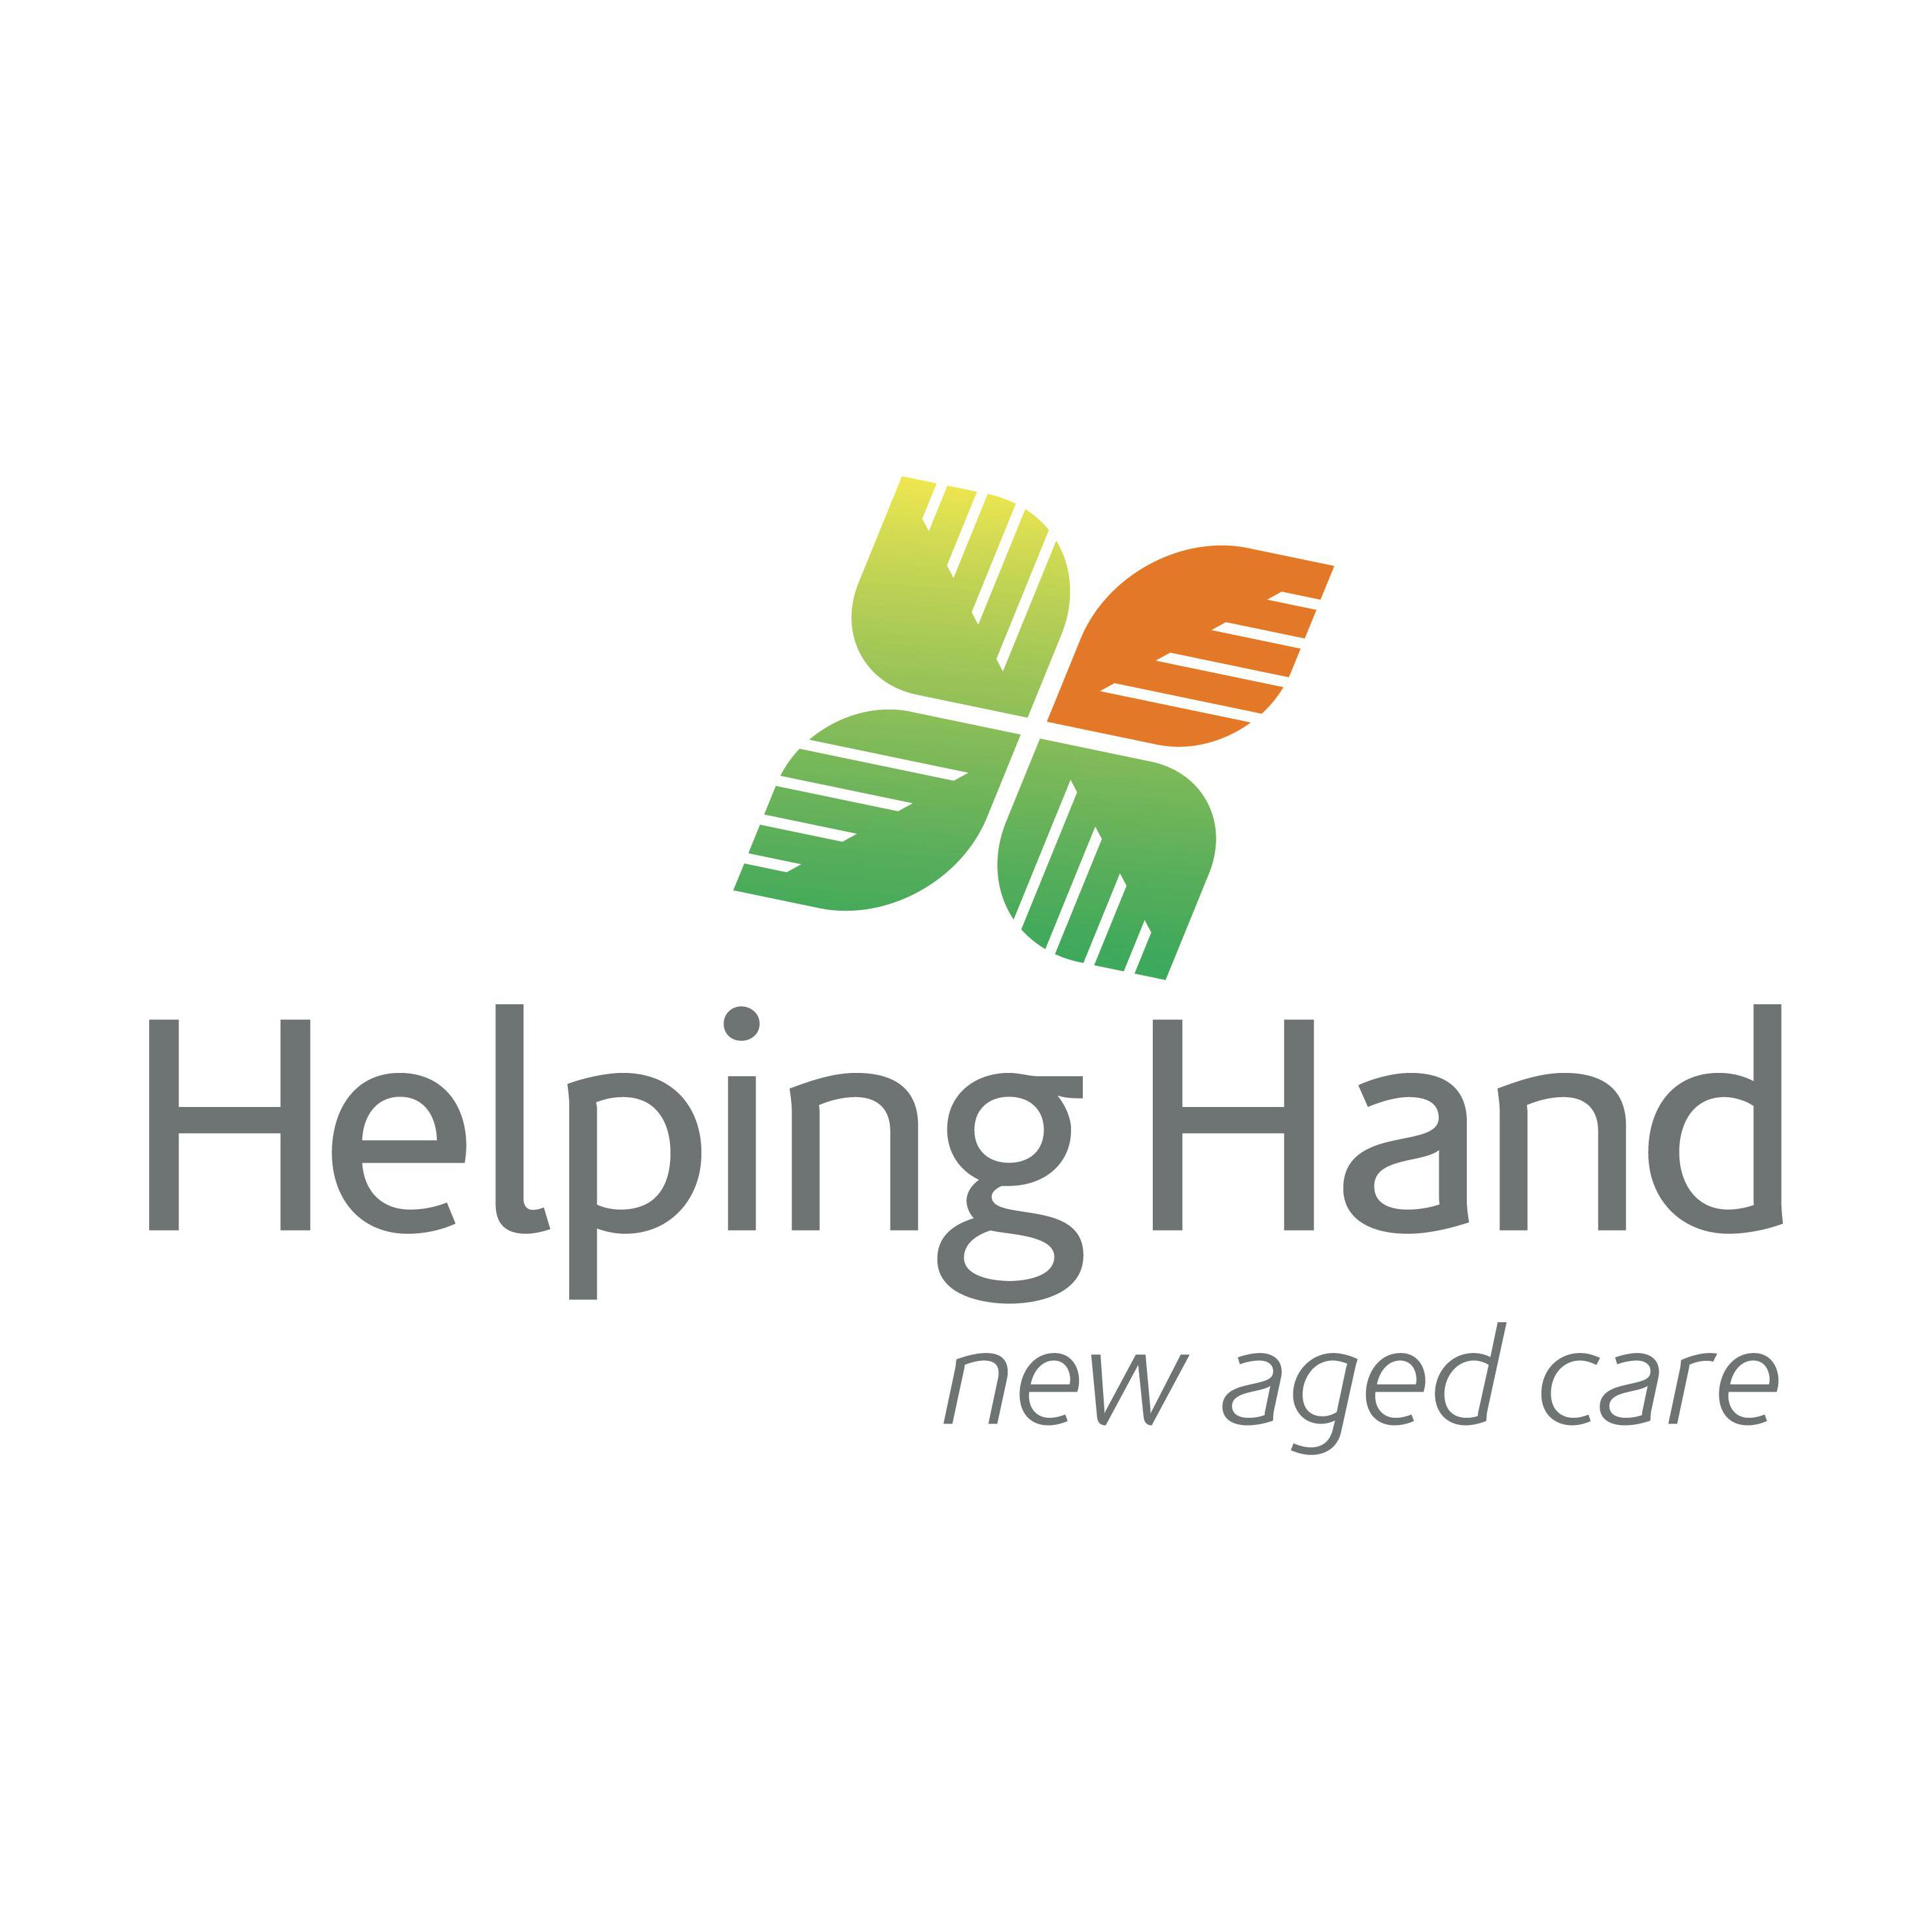 Helping Hand North Adelaide North Adelaide (08) 8224 7777